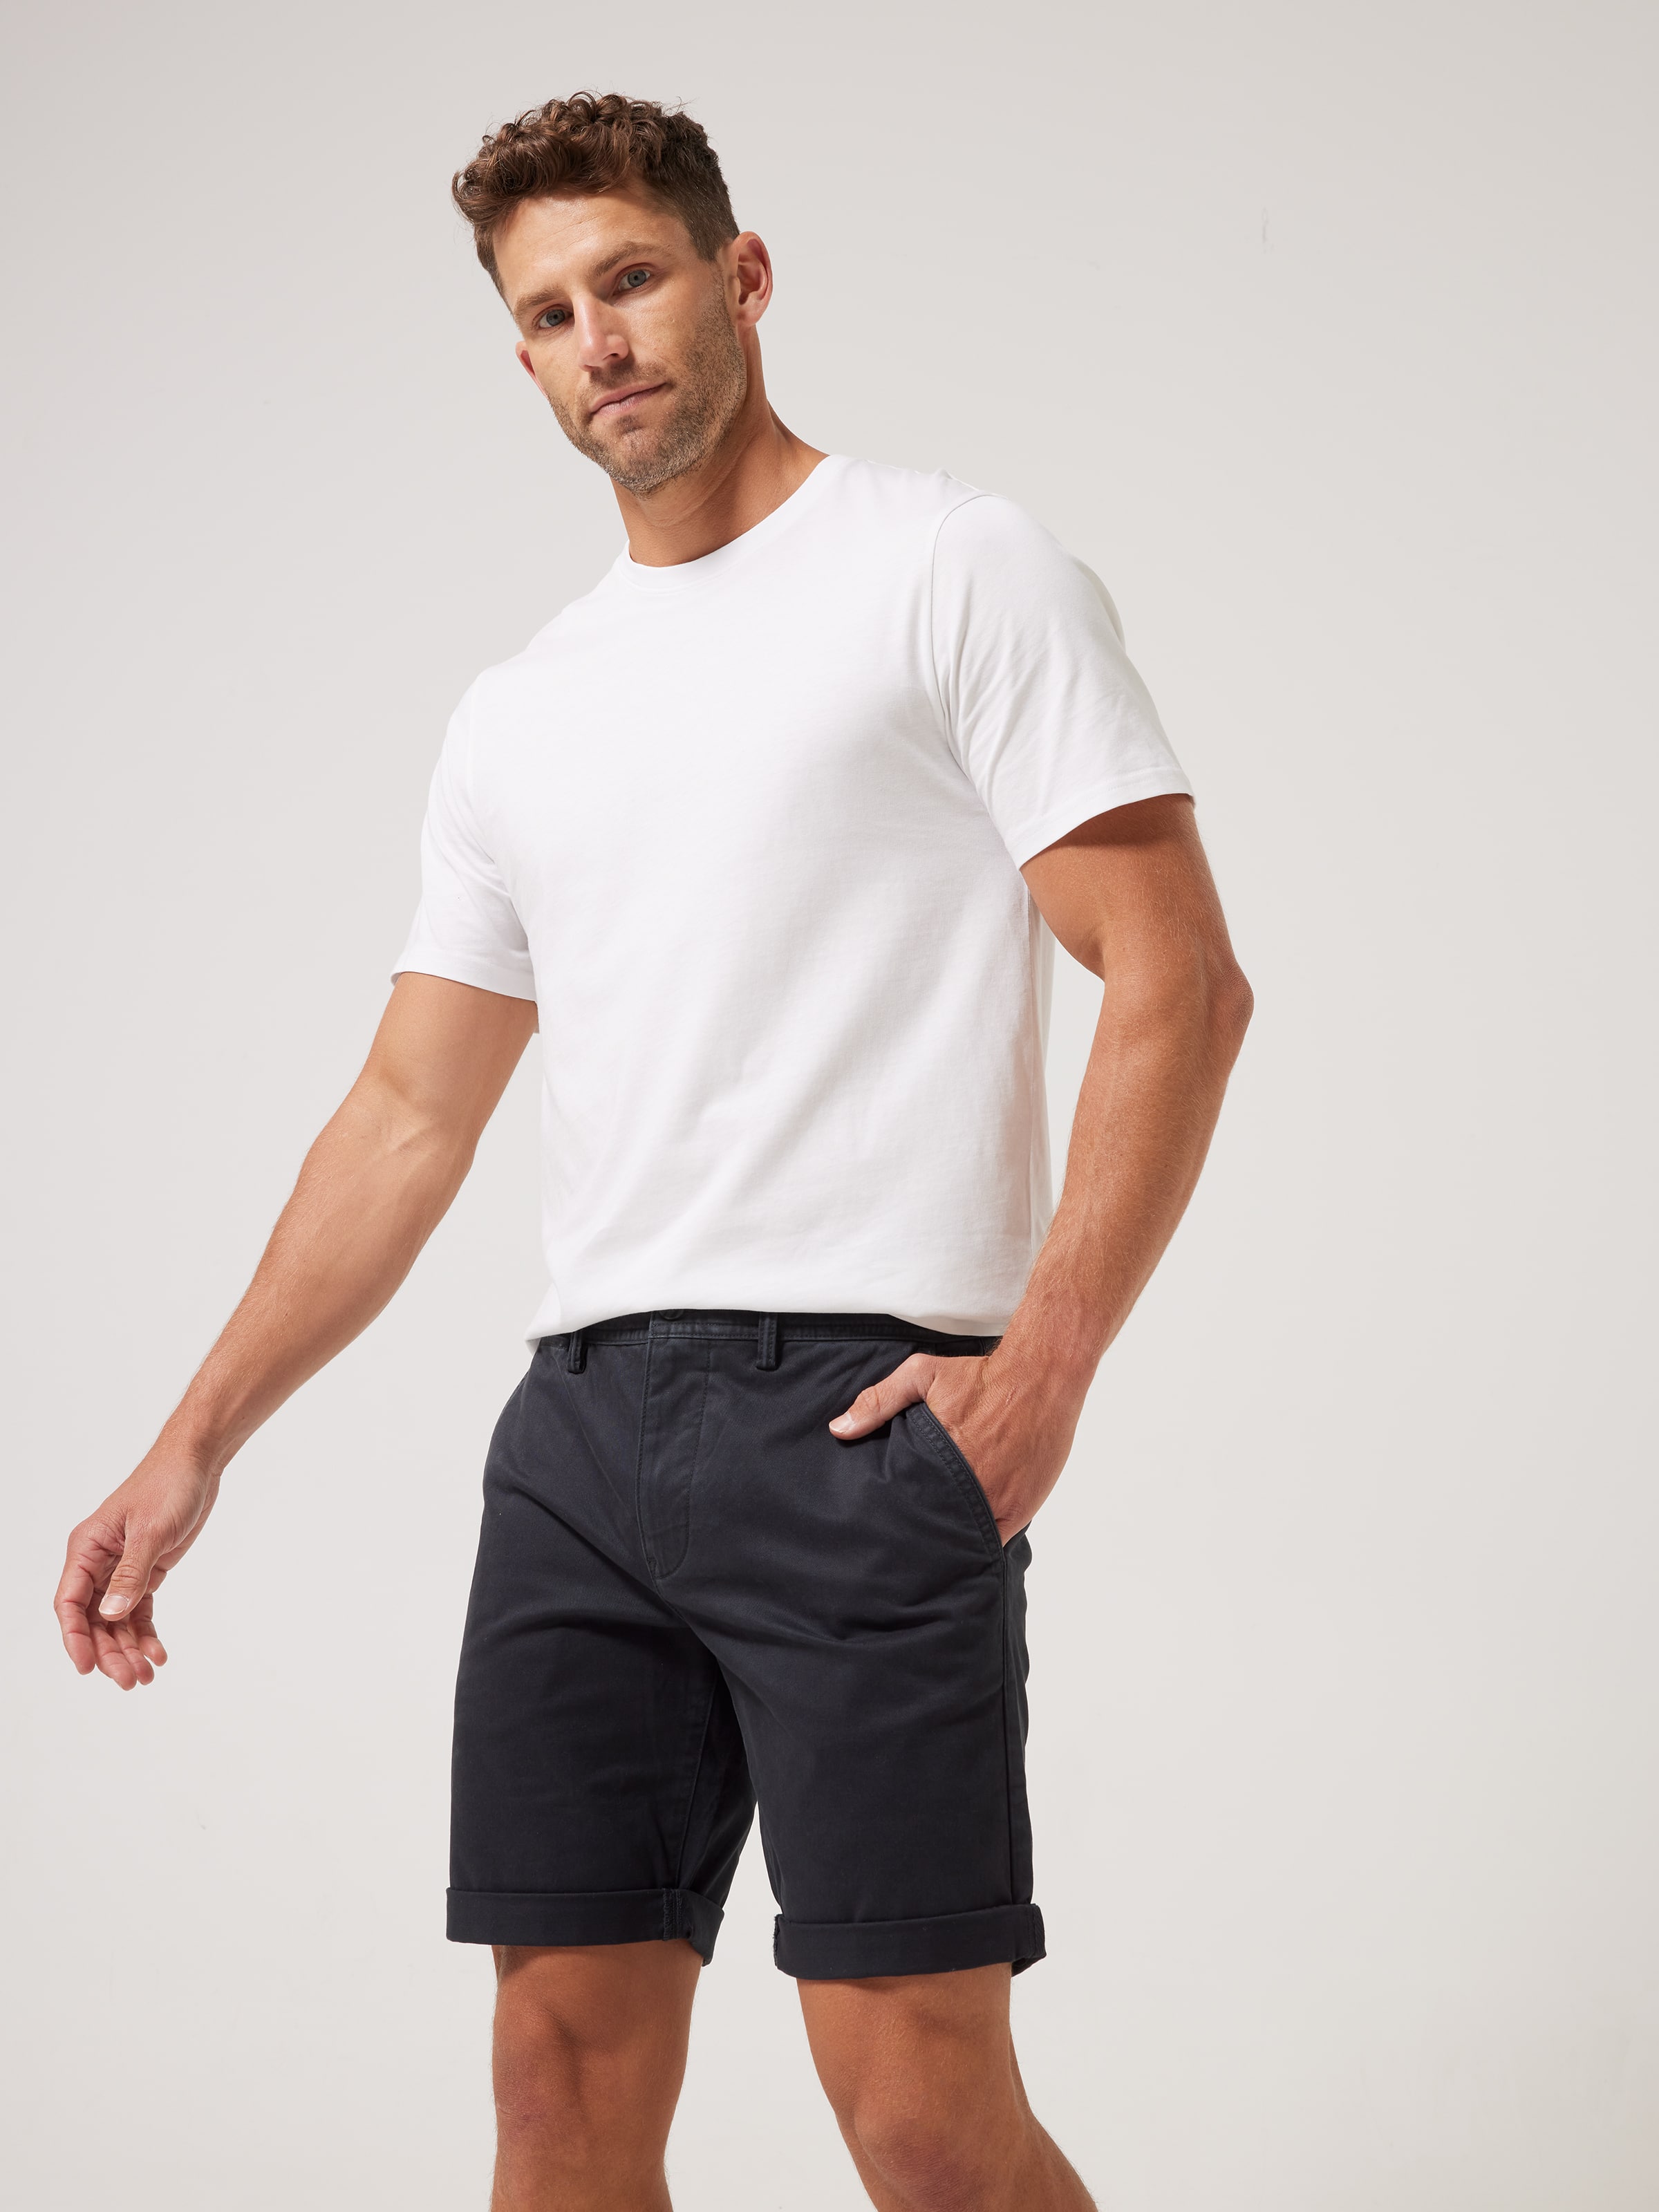 Camel Chino Short Slim Fit Cotton Stretch